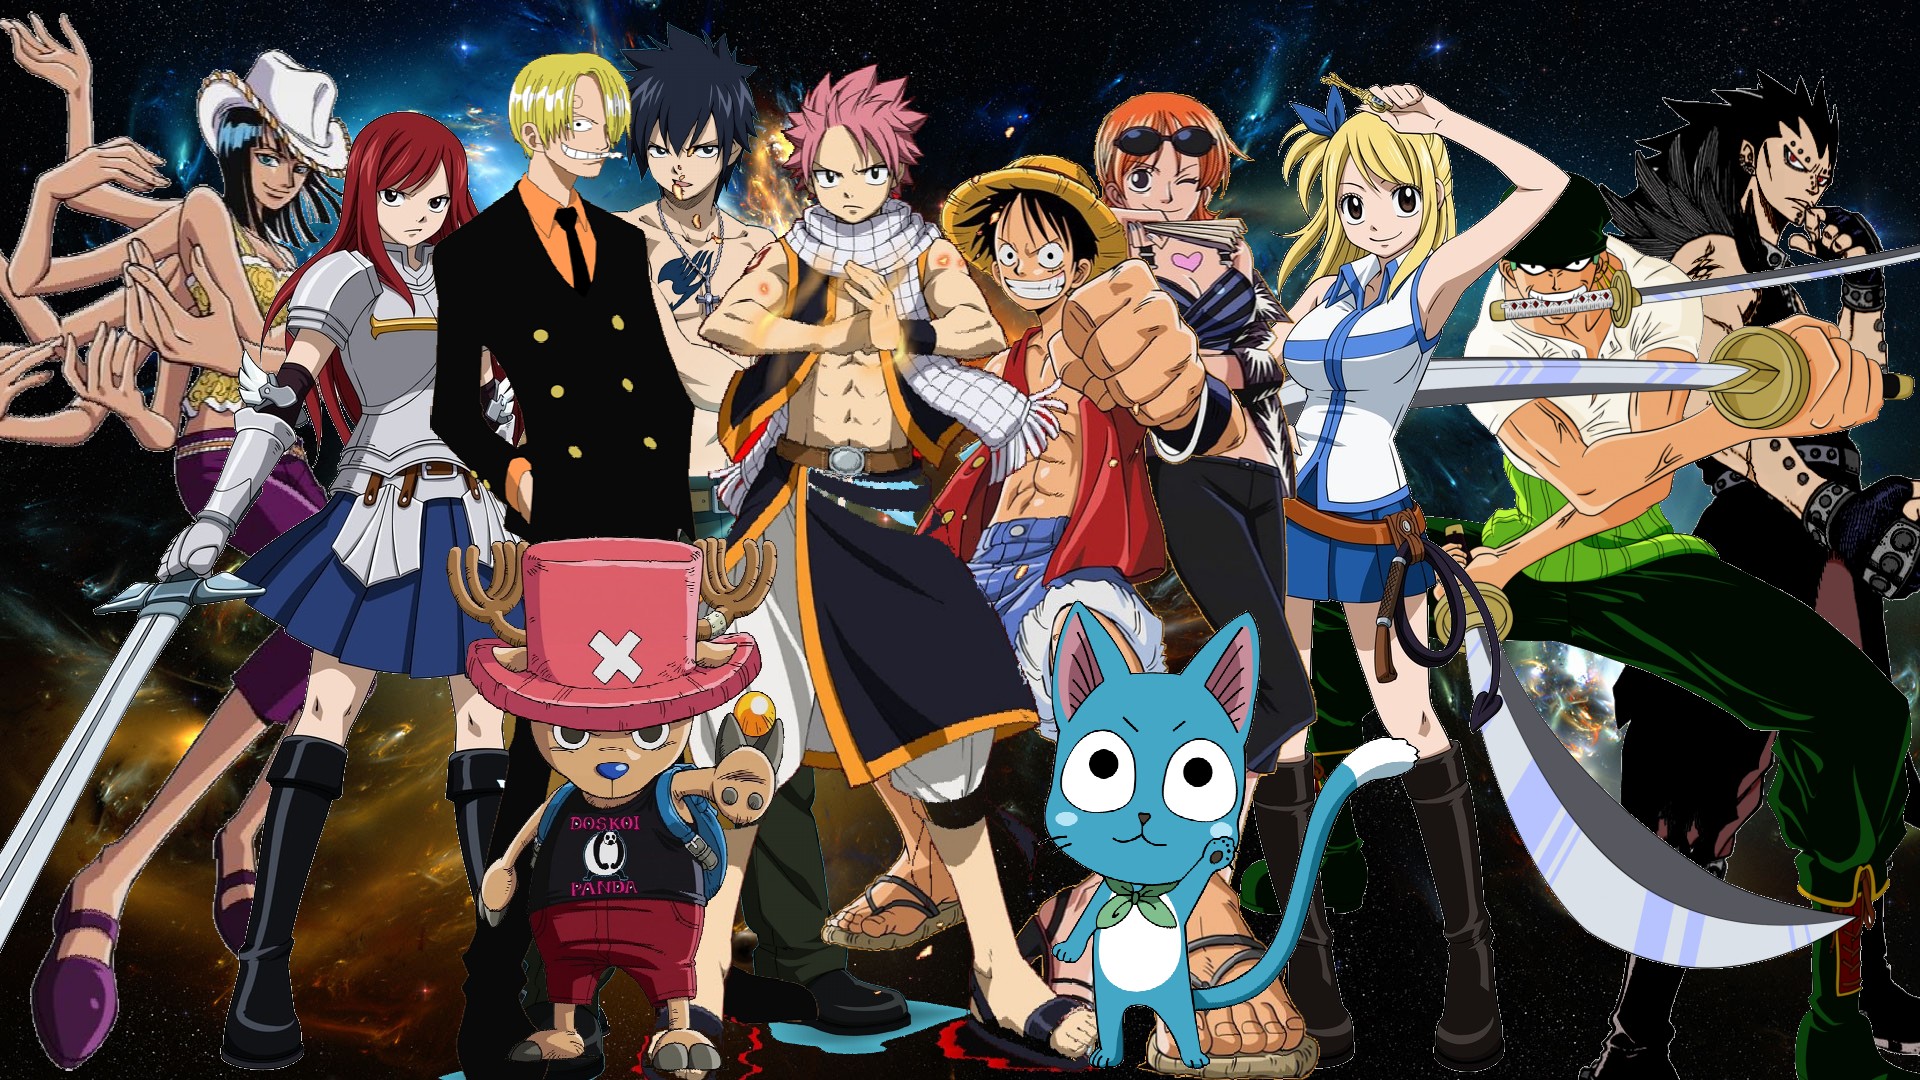 Fairy tail x one piece crossover by negator7-d4l0y2x